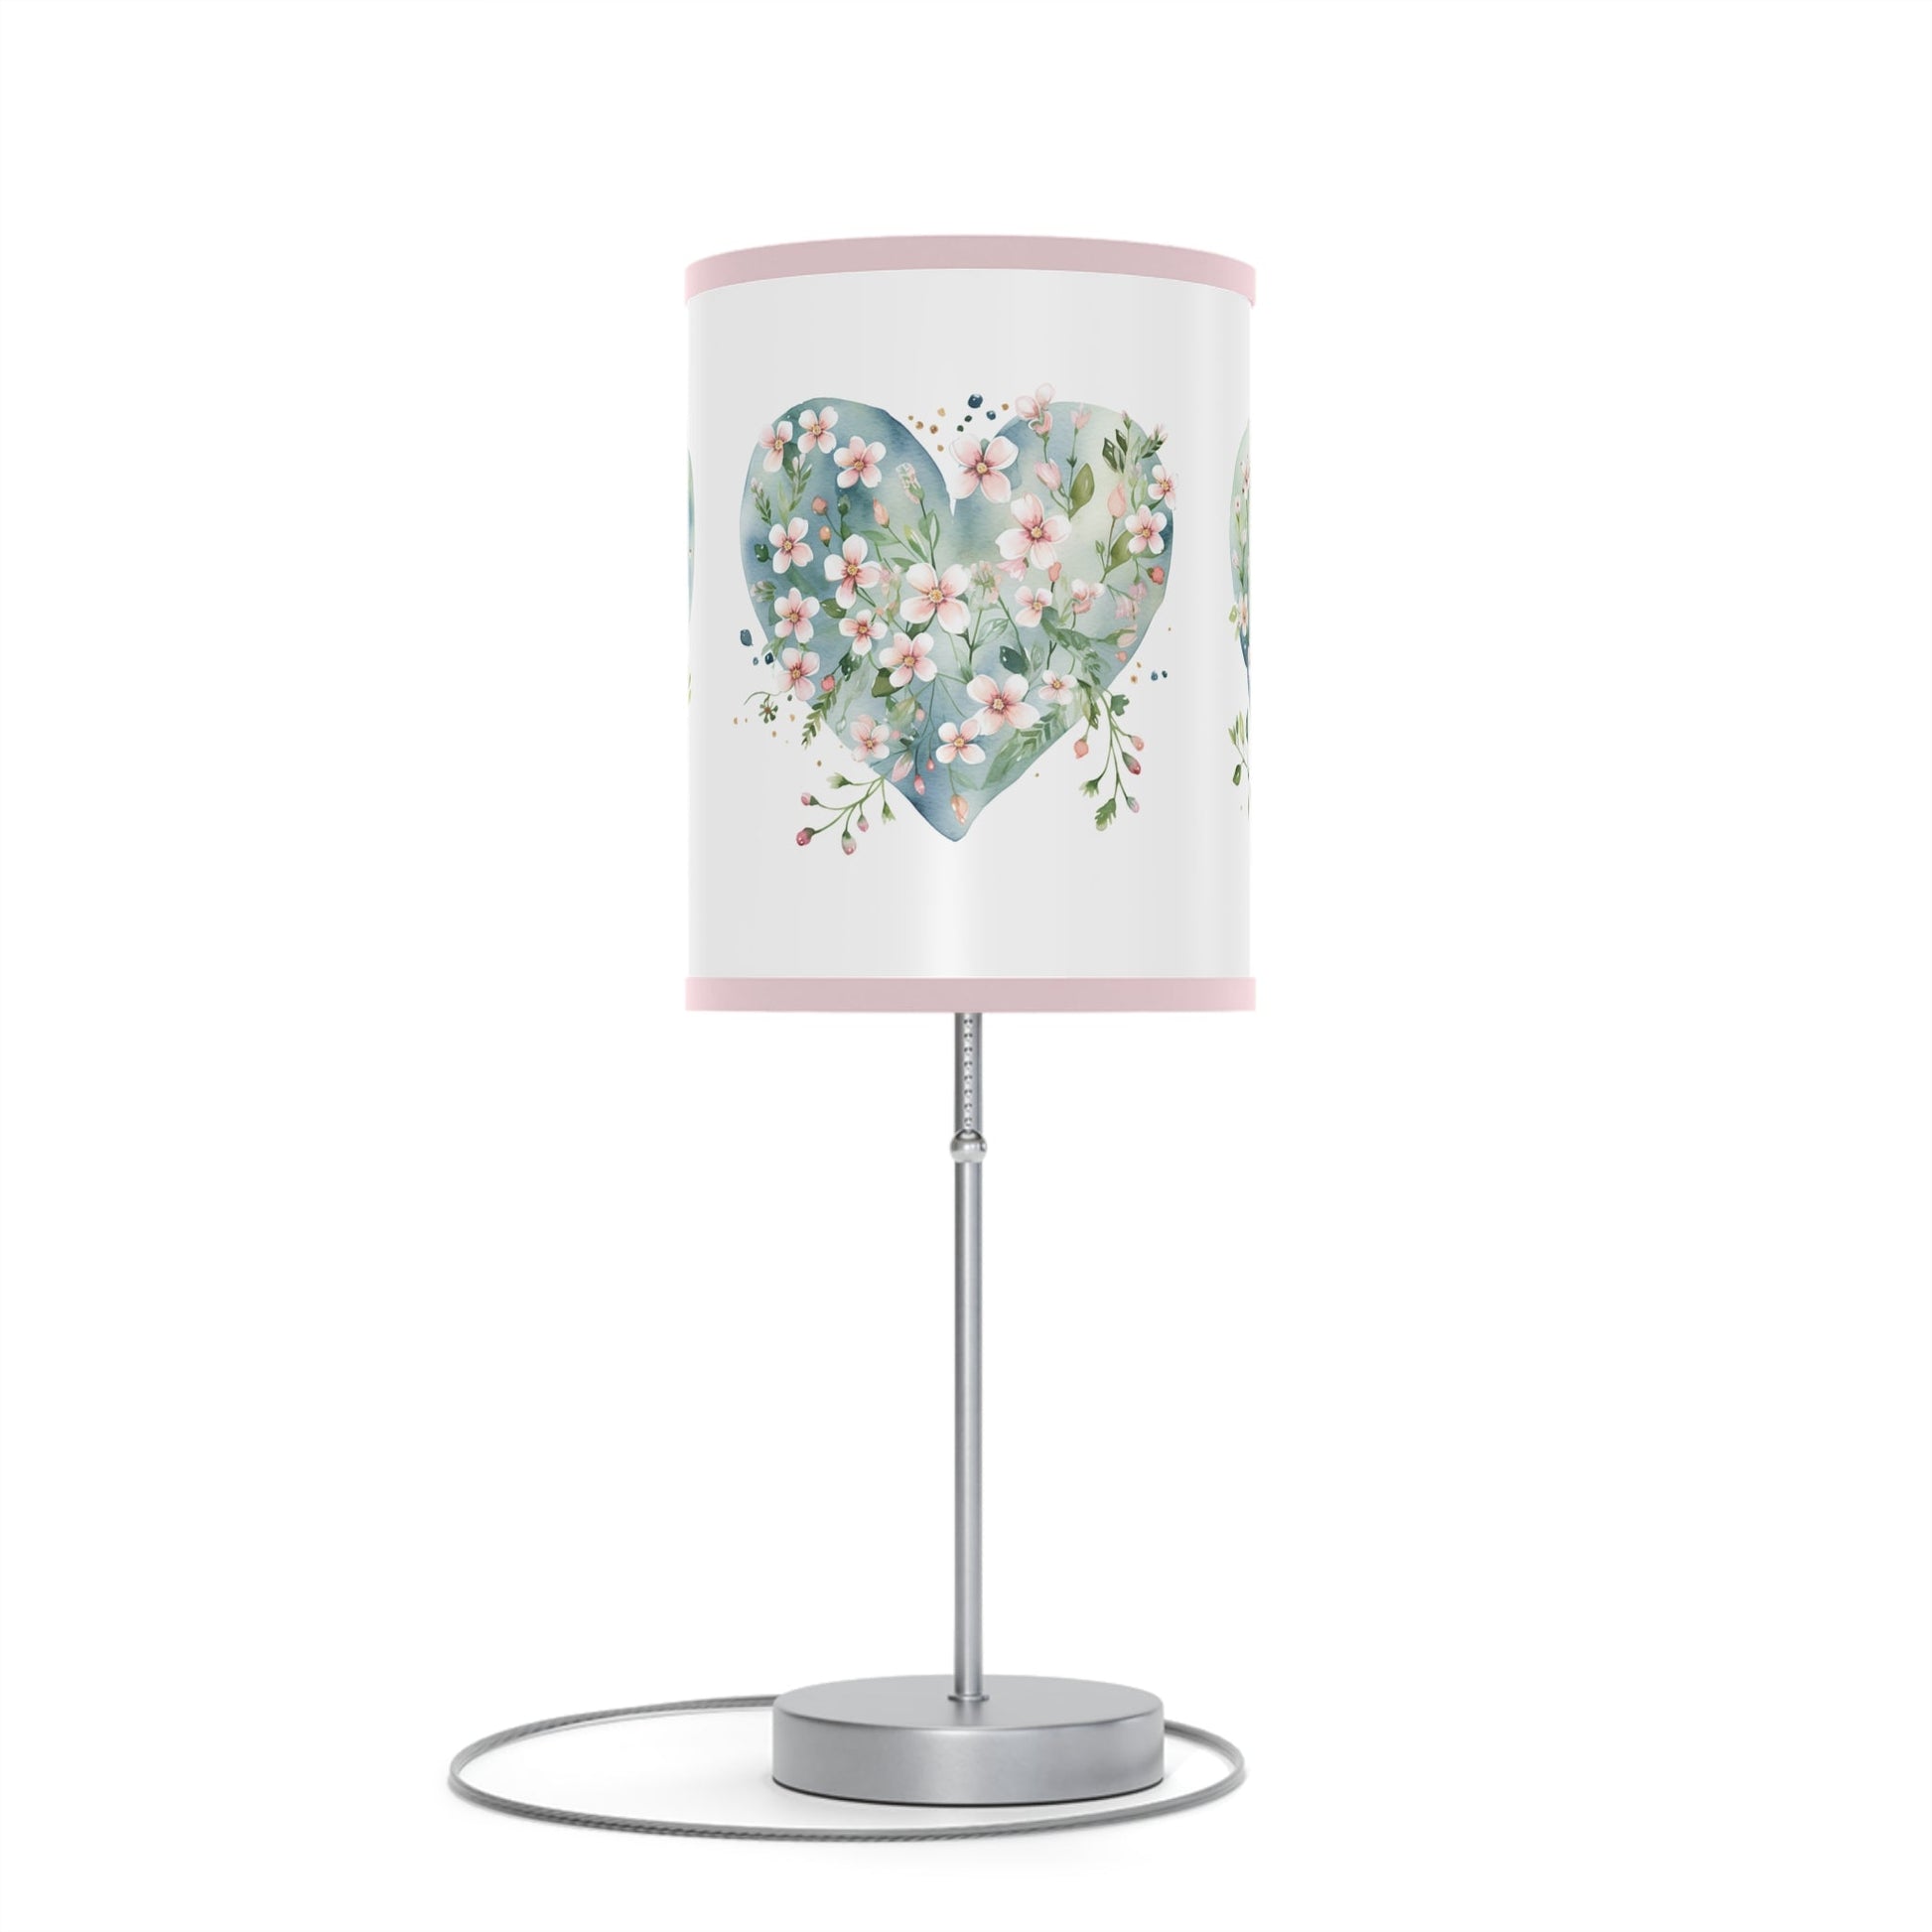 Sweet Hearts Table Lamp, Perfect Girls Room or Romantic Nook Design Accent Lamp, Cheery Bright Decor, Office Desk Accessory Lamp - FlooredByArt